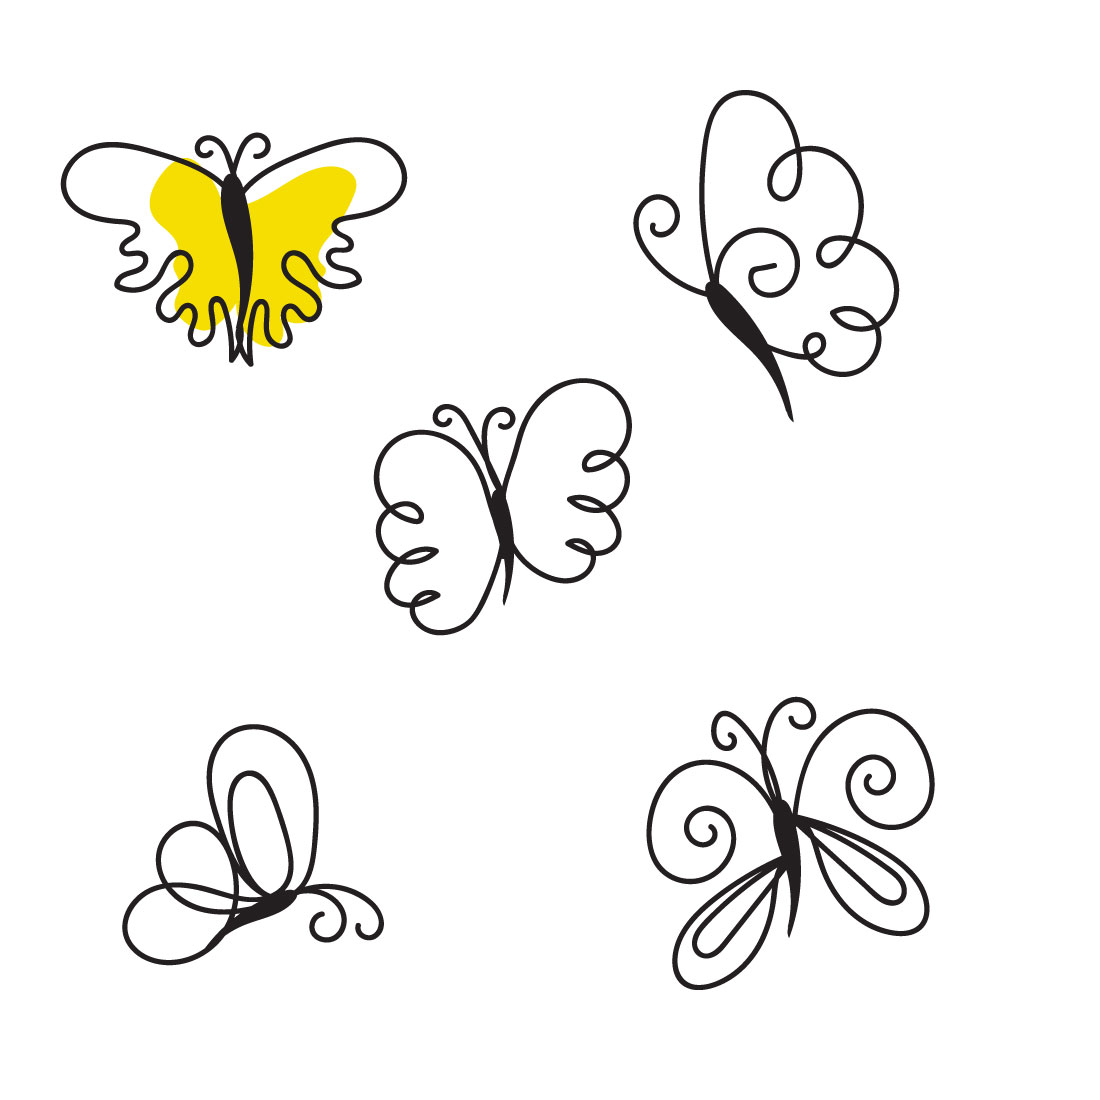 Set of four different butterflies on a white background.